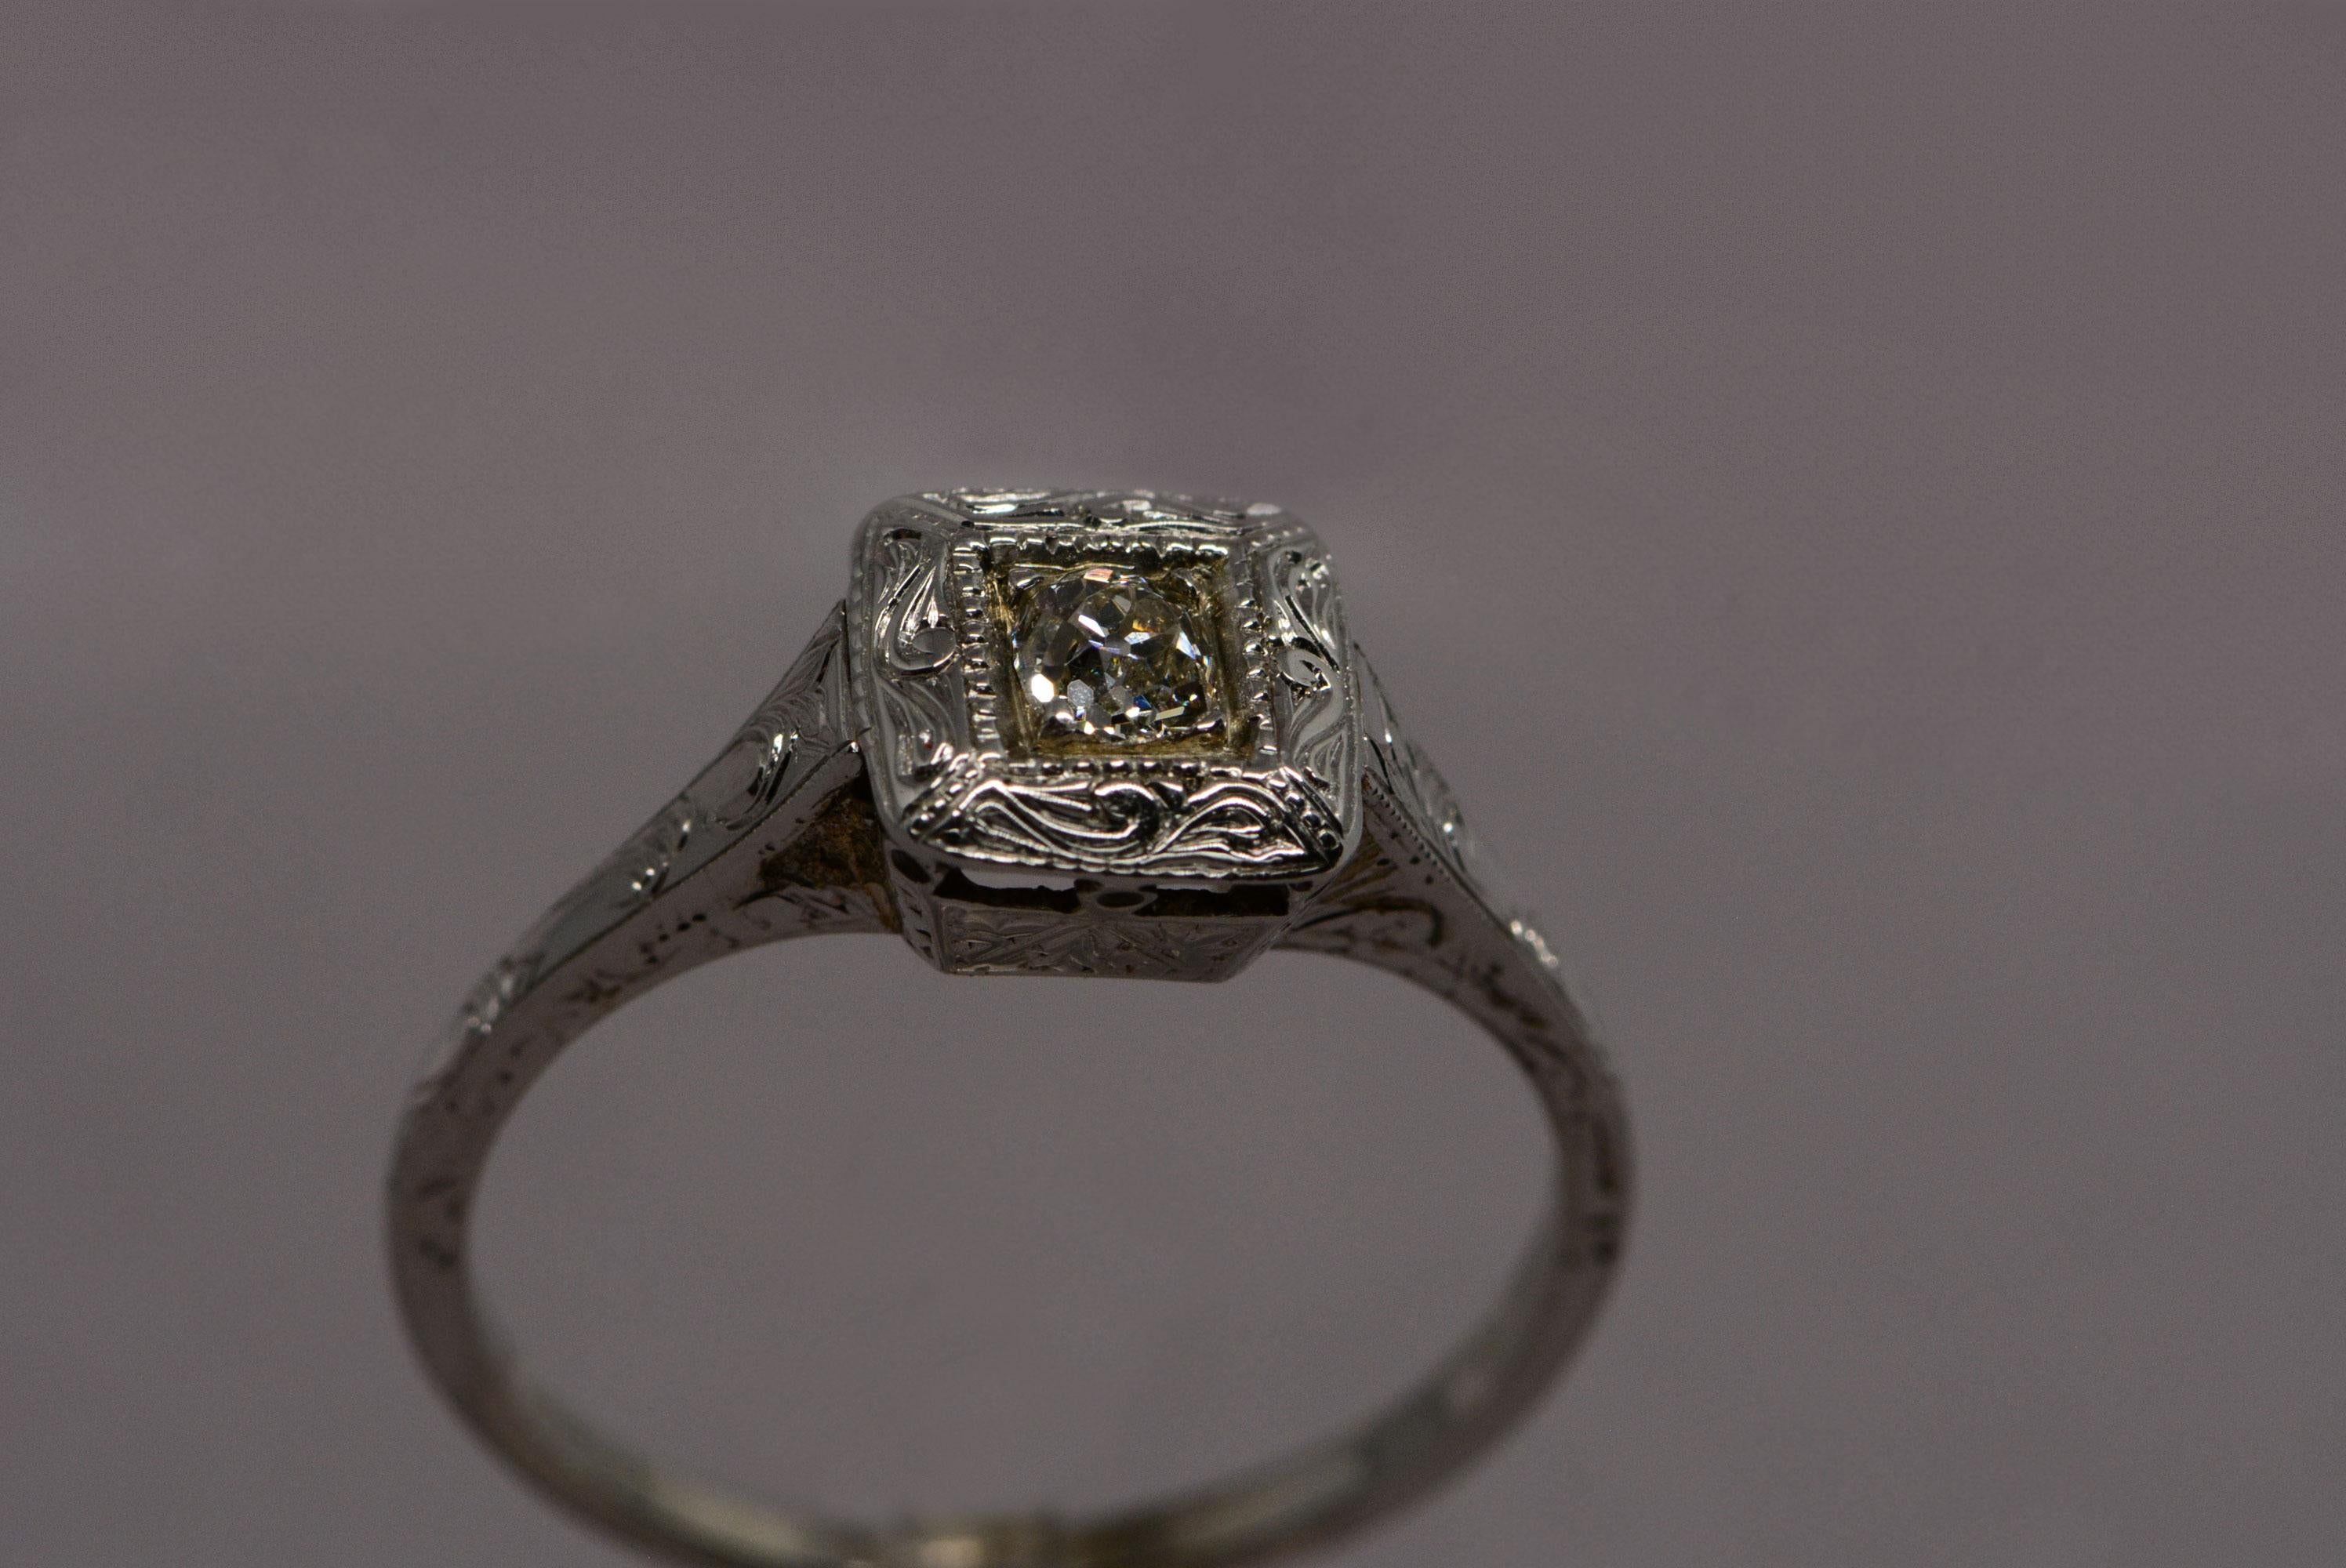 The antique diamond in this ring is an old mine cut, with the coveted small table and high crown angles that makes it sparkle like a little fireball. If you want a lively old mine cut that has good play of light, this diamond is it.
The diamond is